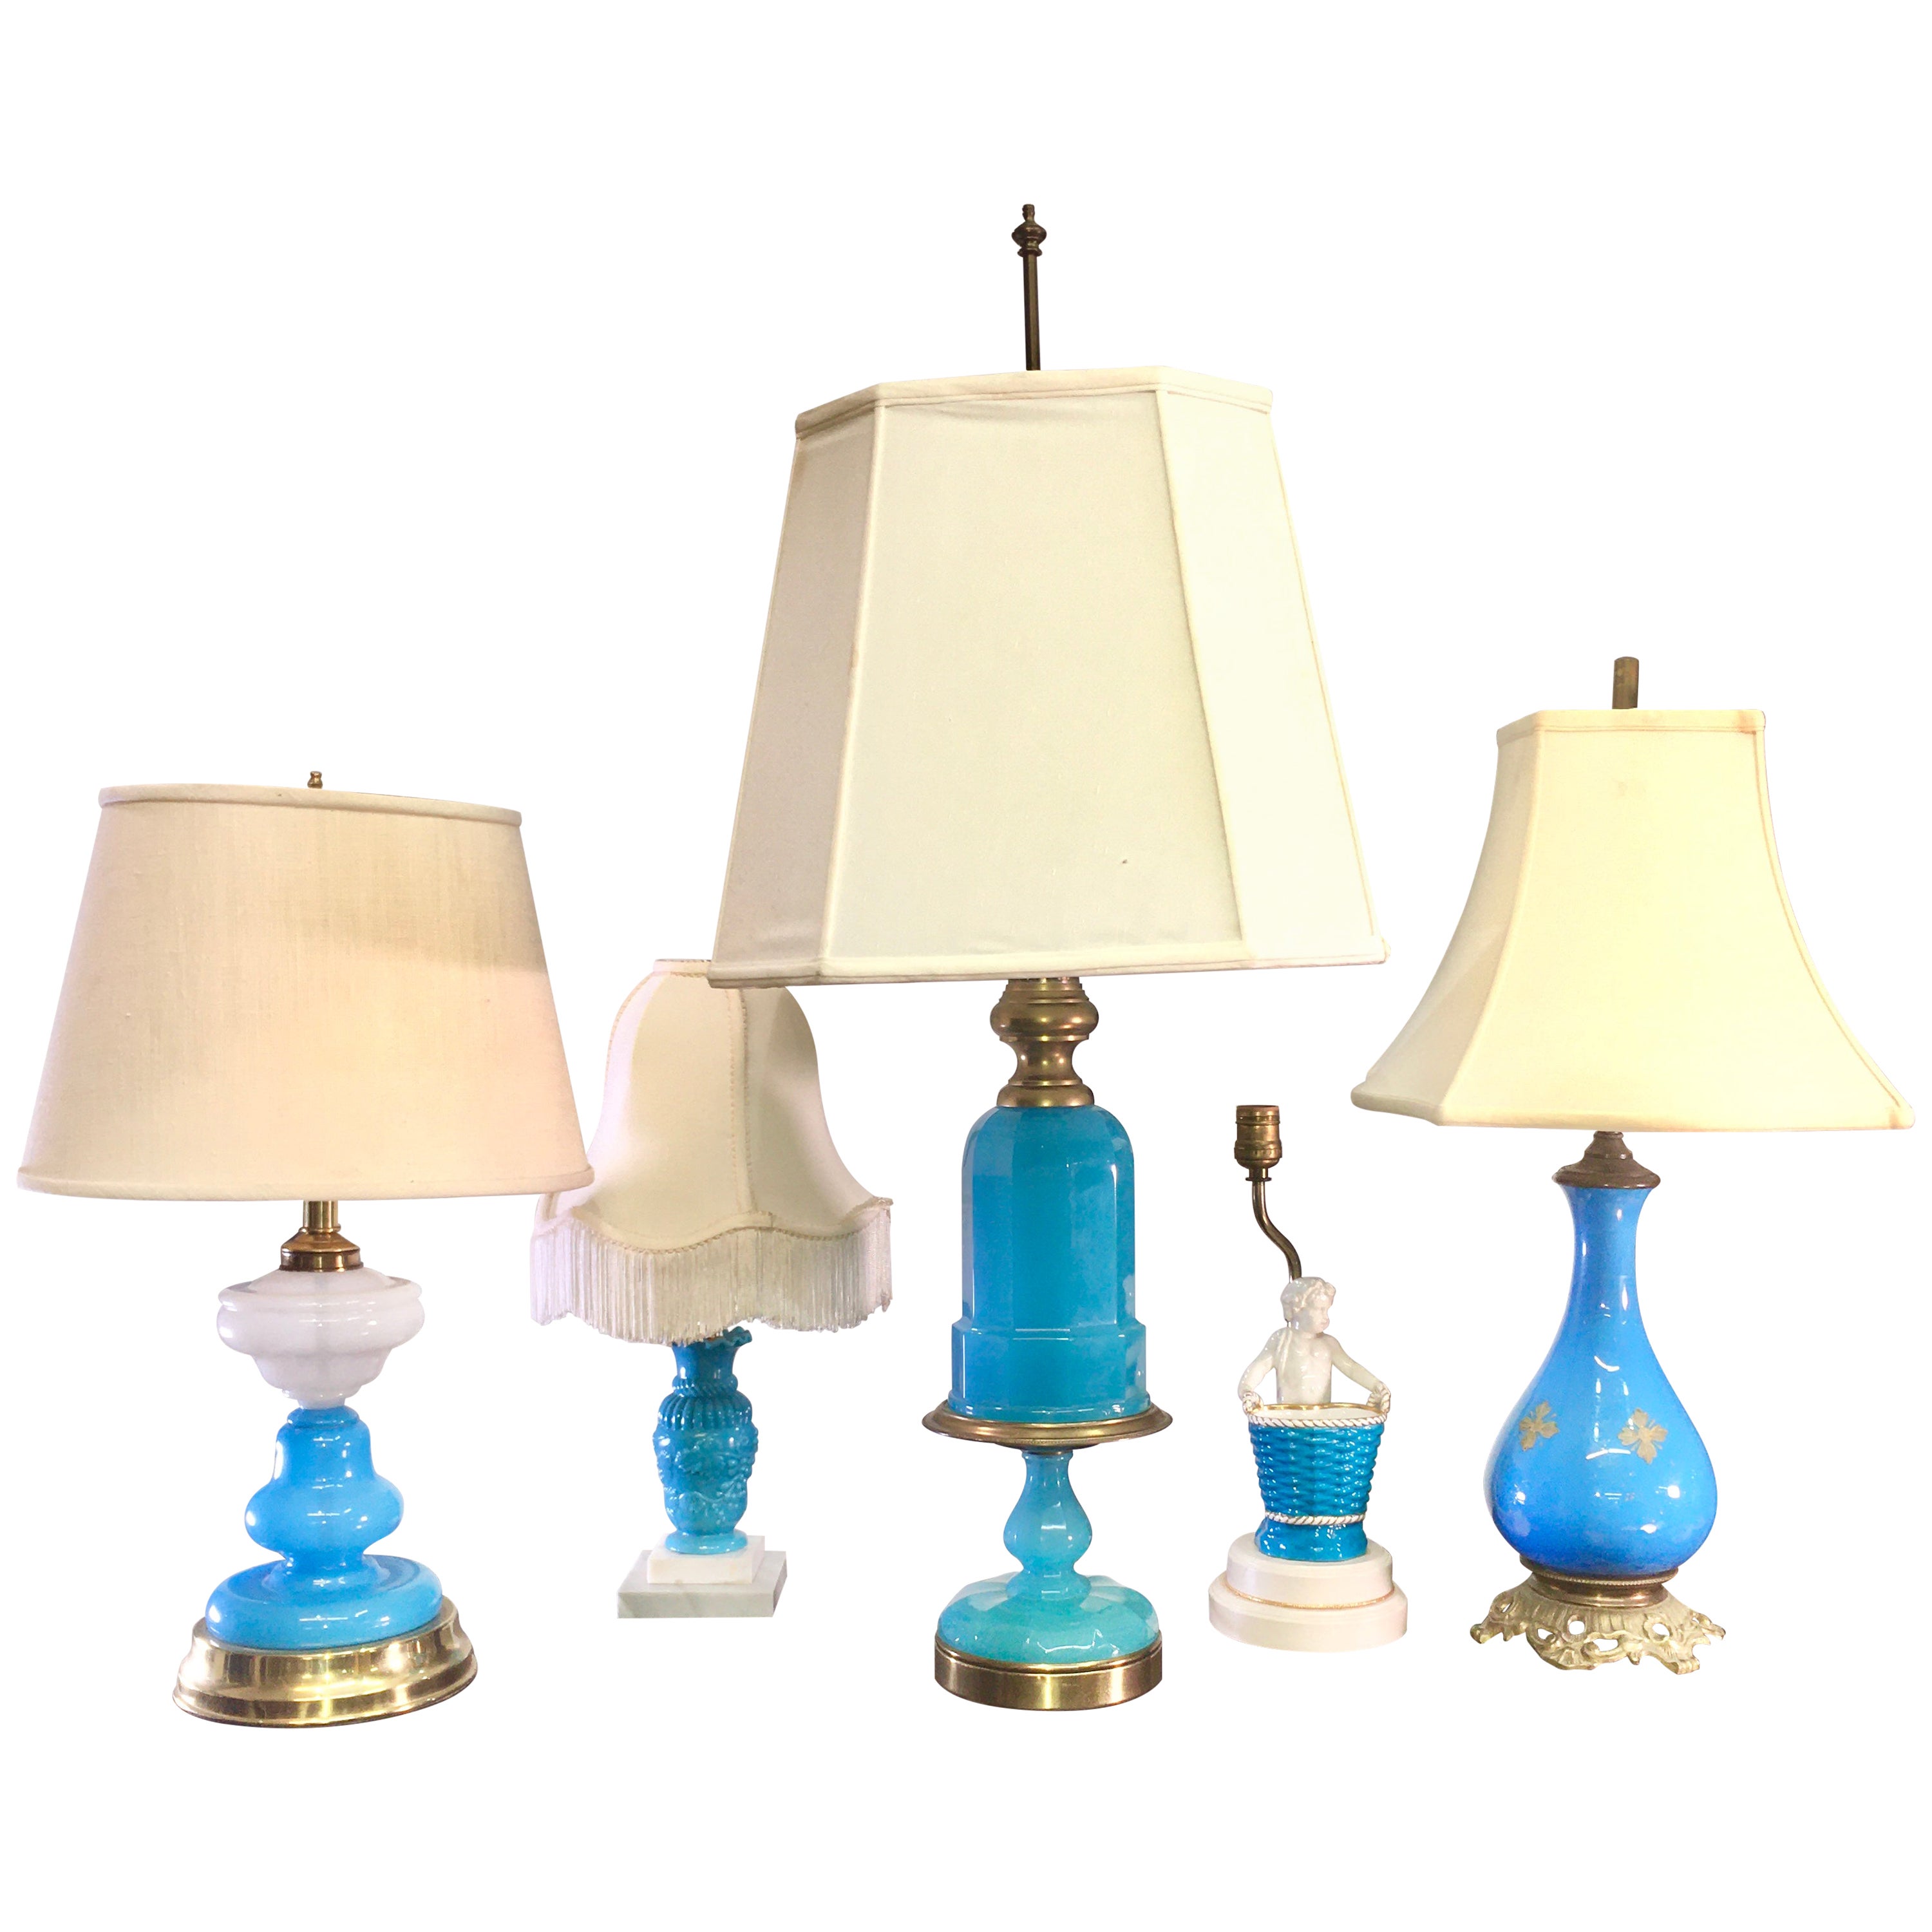 Collection of Blue Glass, Opaline & Ceramic Lamps